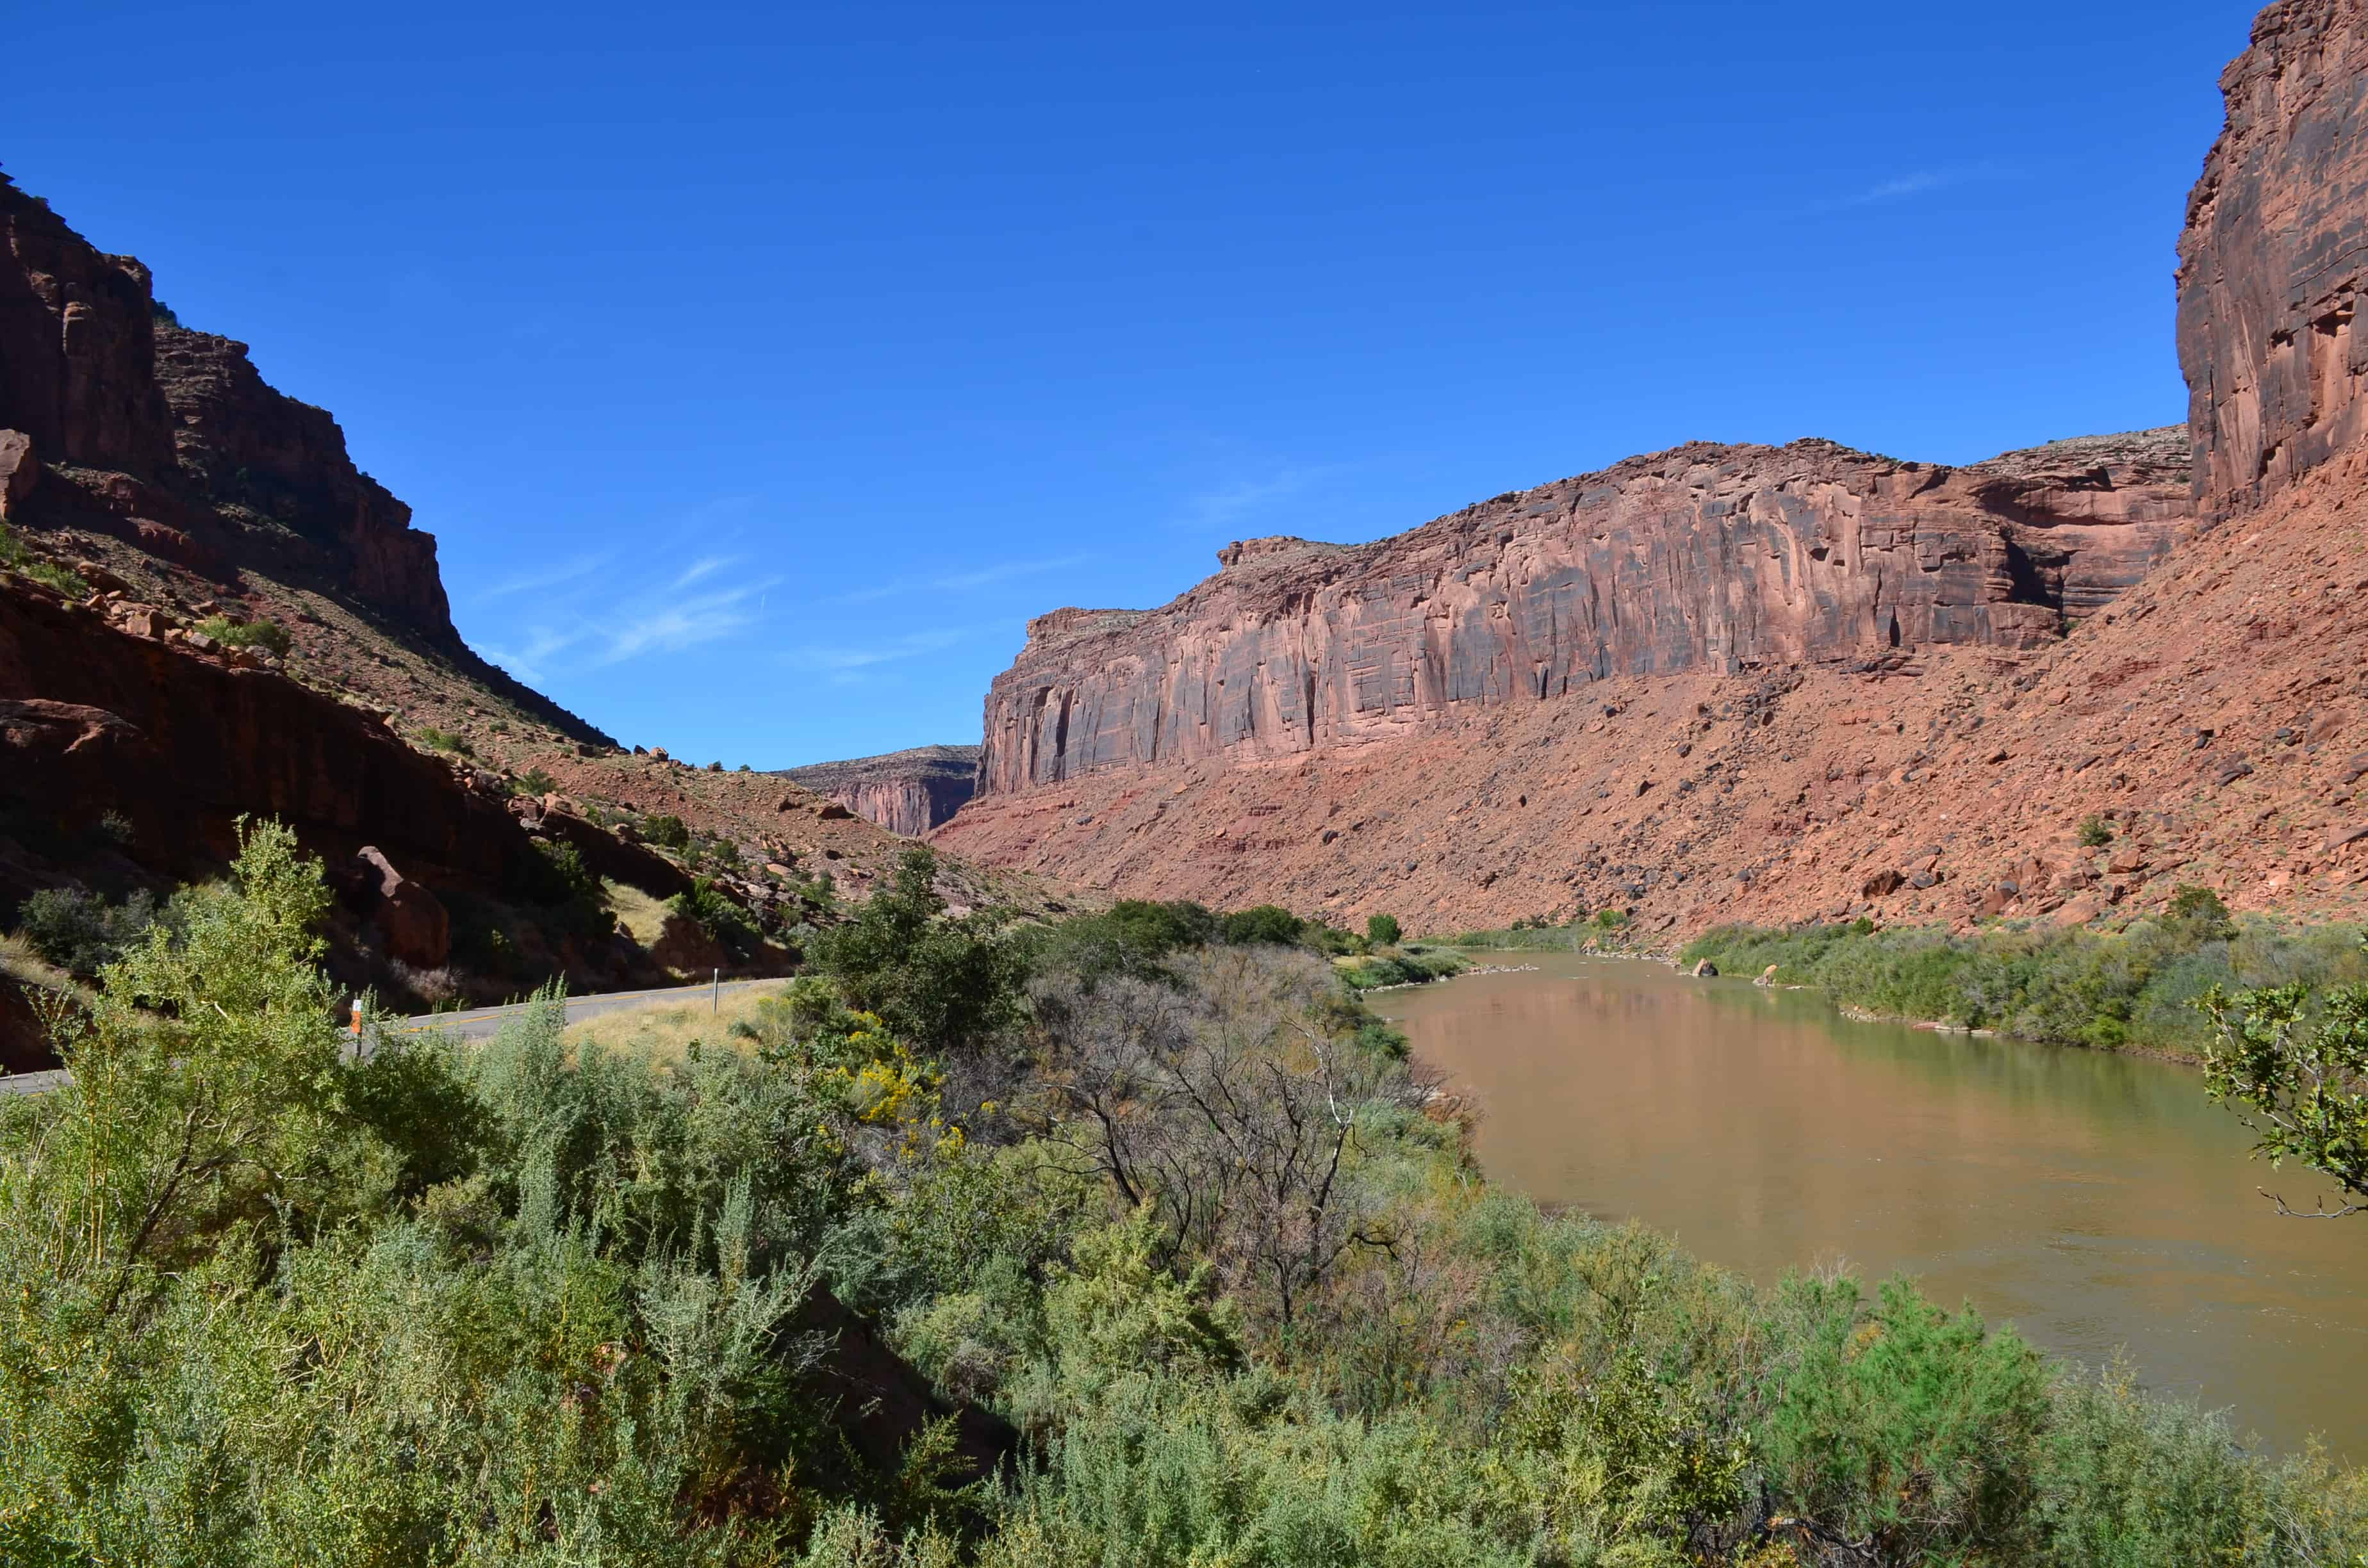 Photo stop along the Upper Colorado River Scenic Byway near Moab, Utah